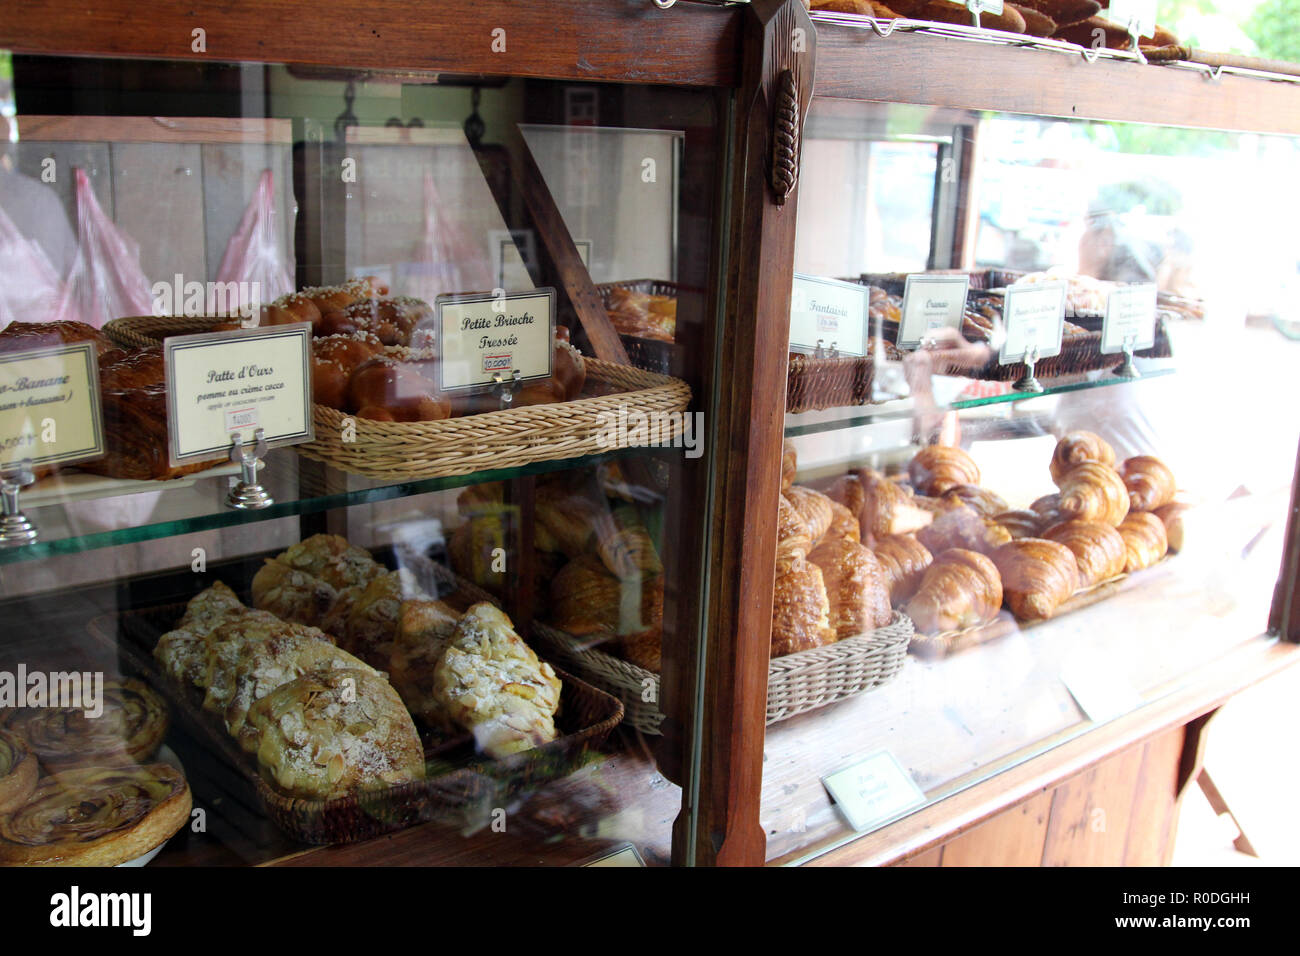 Tasty French baked goods on display at Le Banneton Cafe, Luang Prabang, Laos Stock Photo